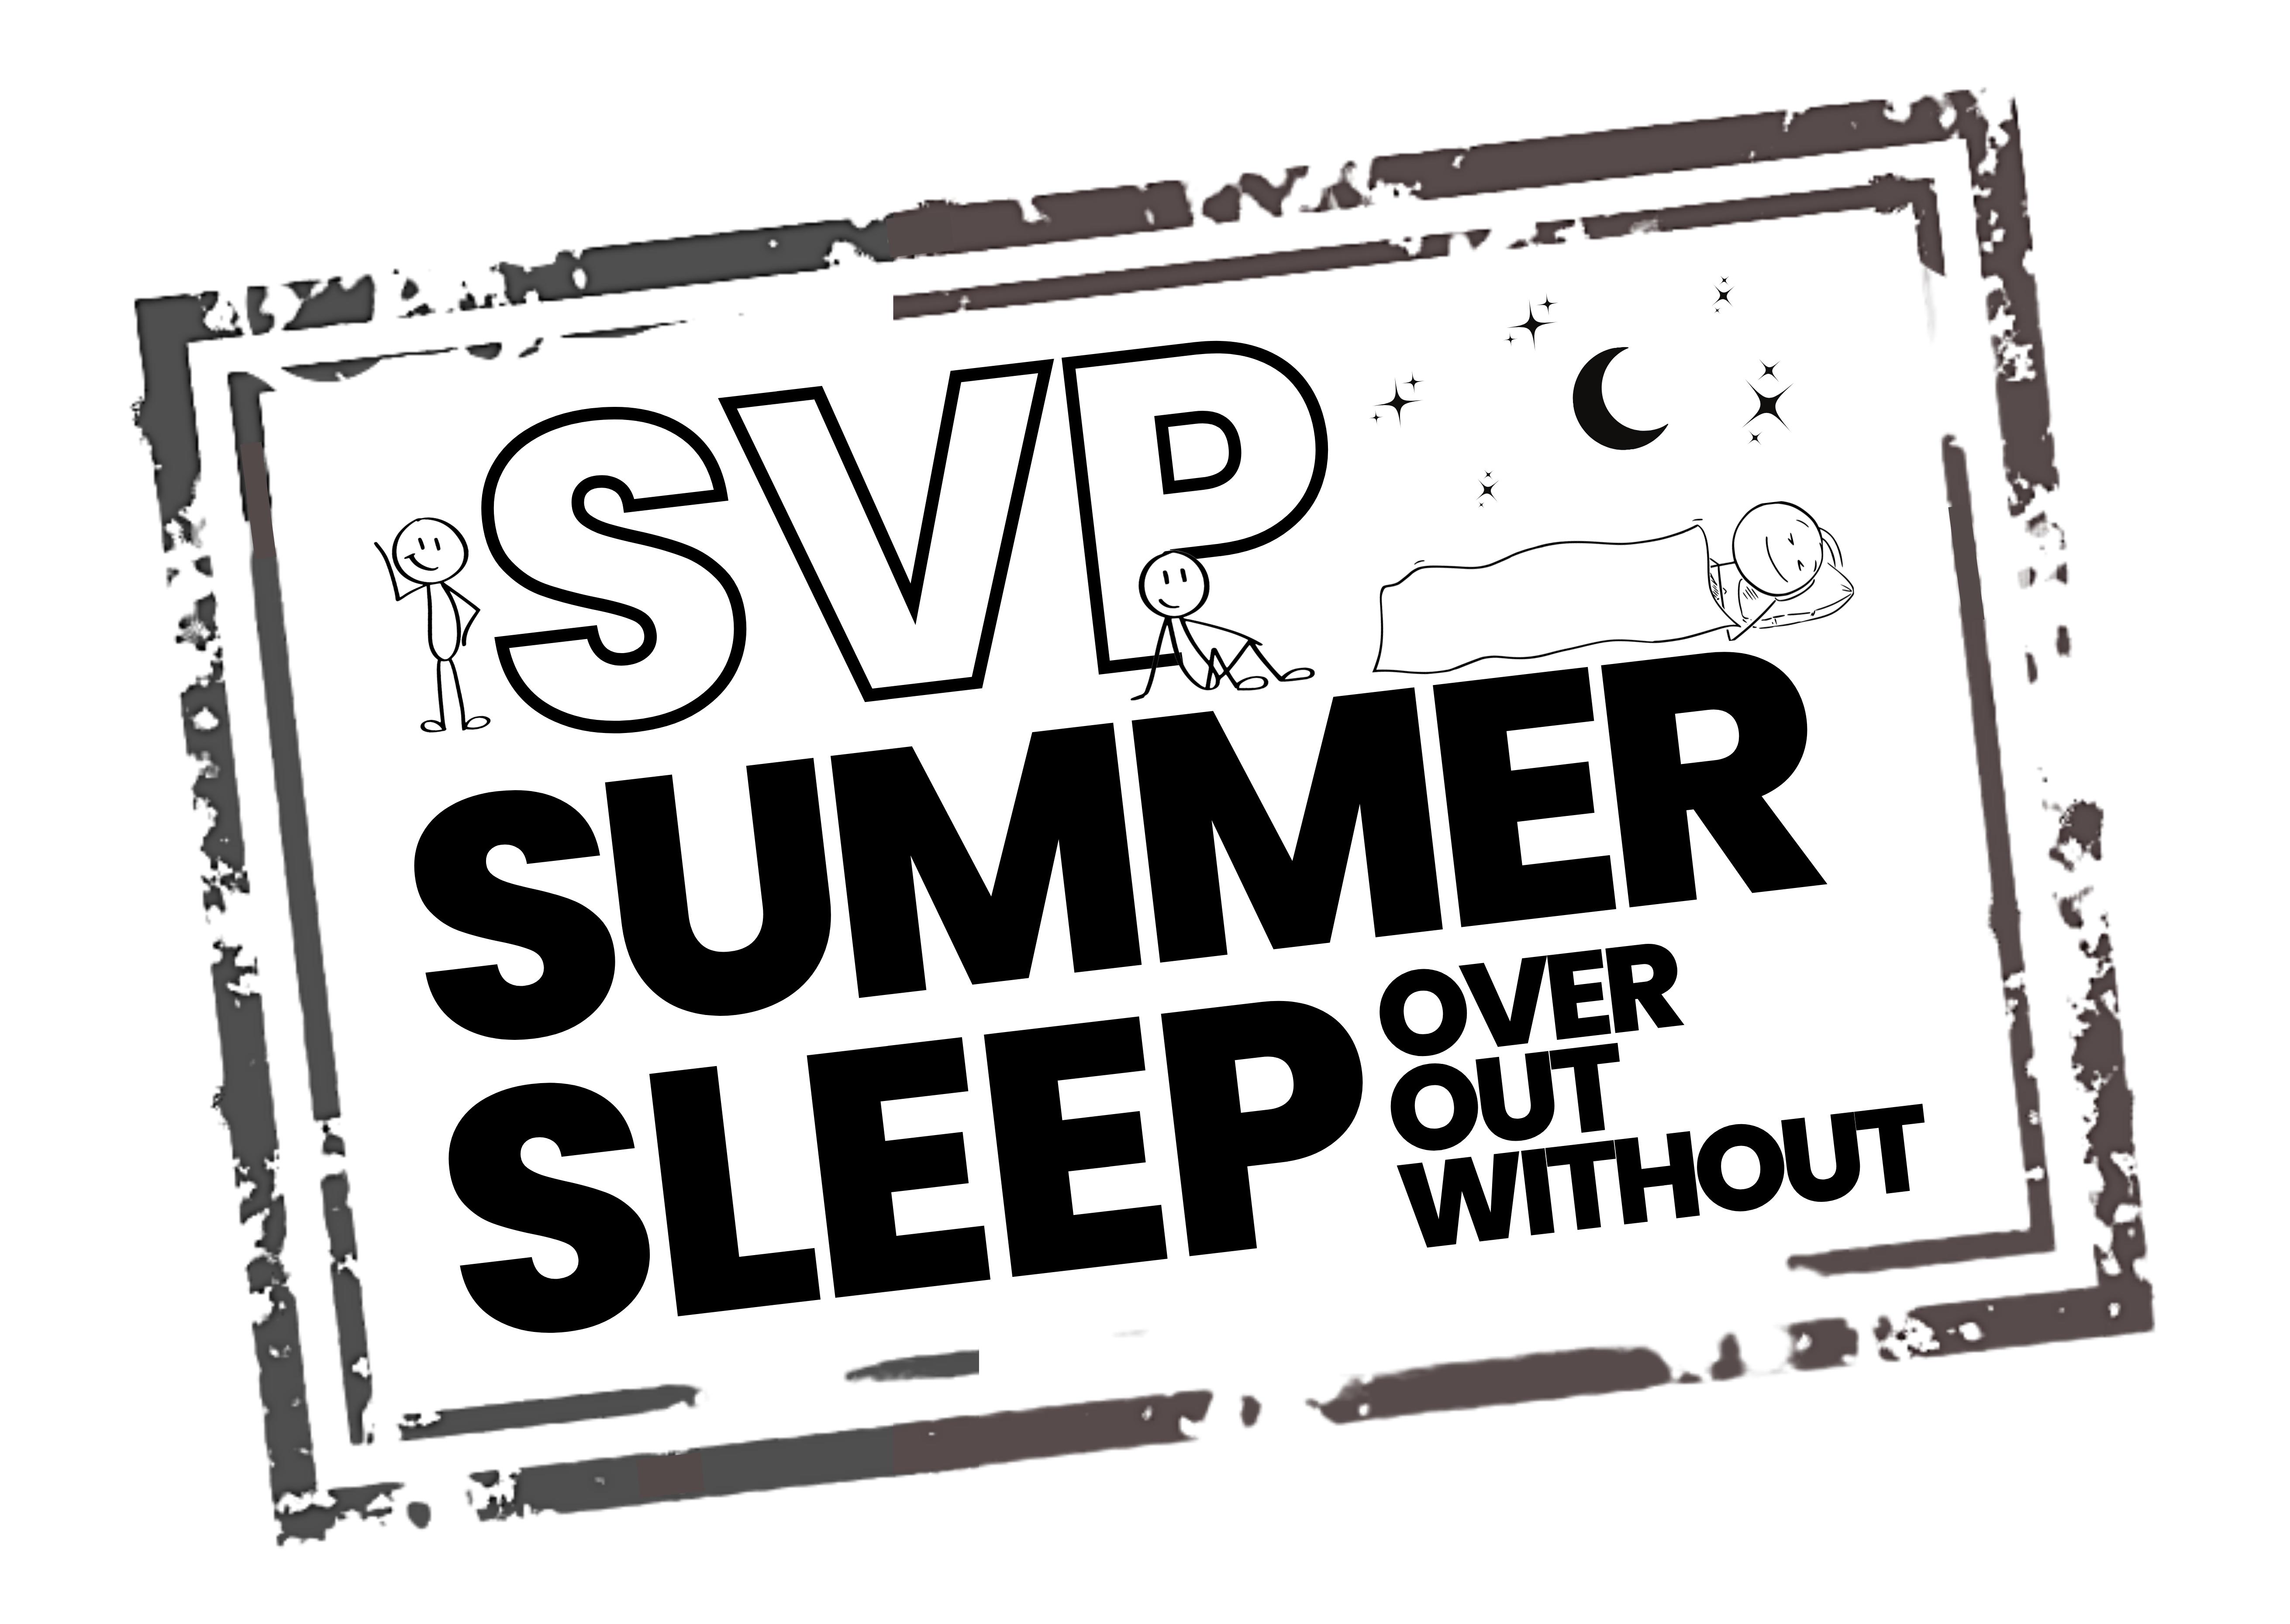 This is an image of the SVP Summer Sleep logo